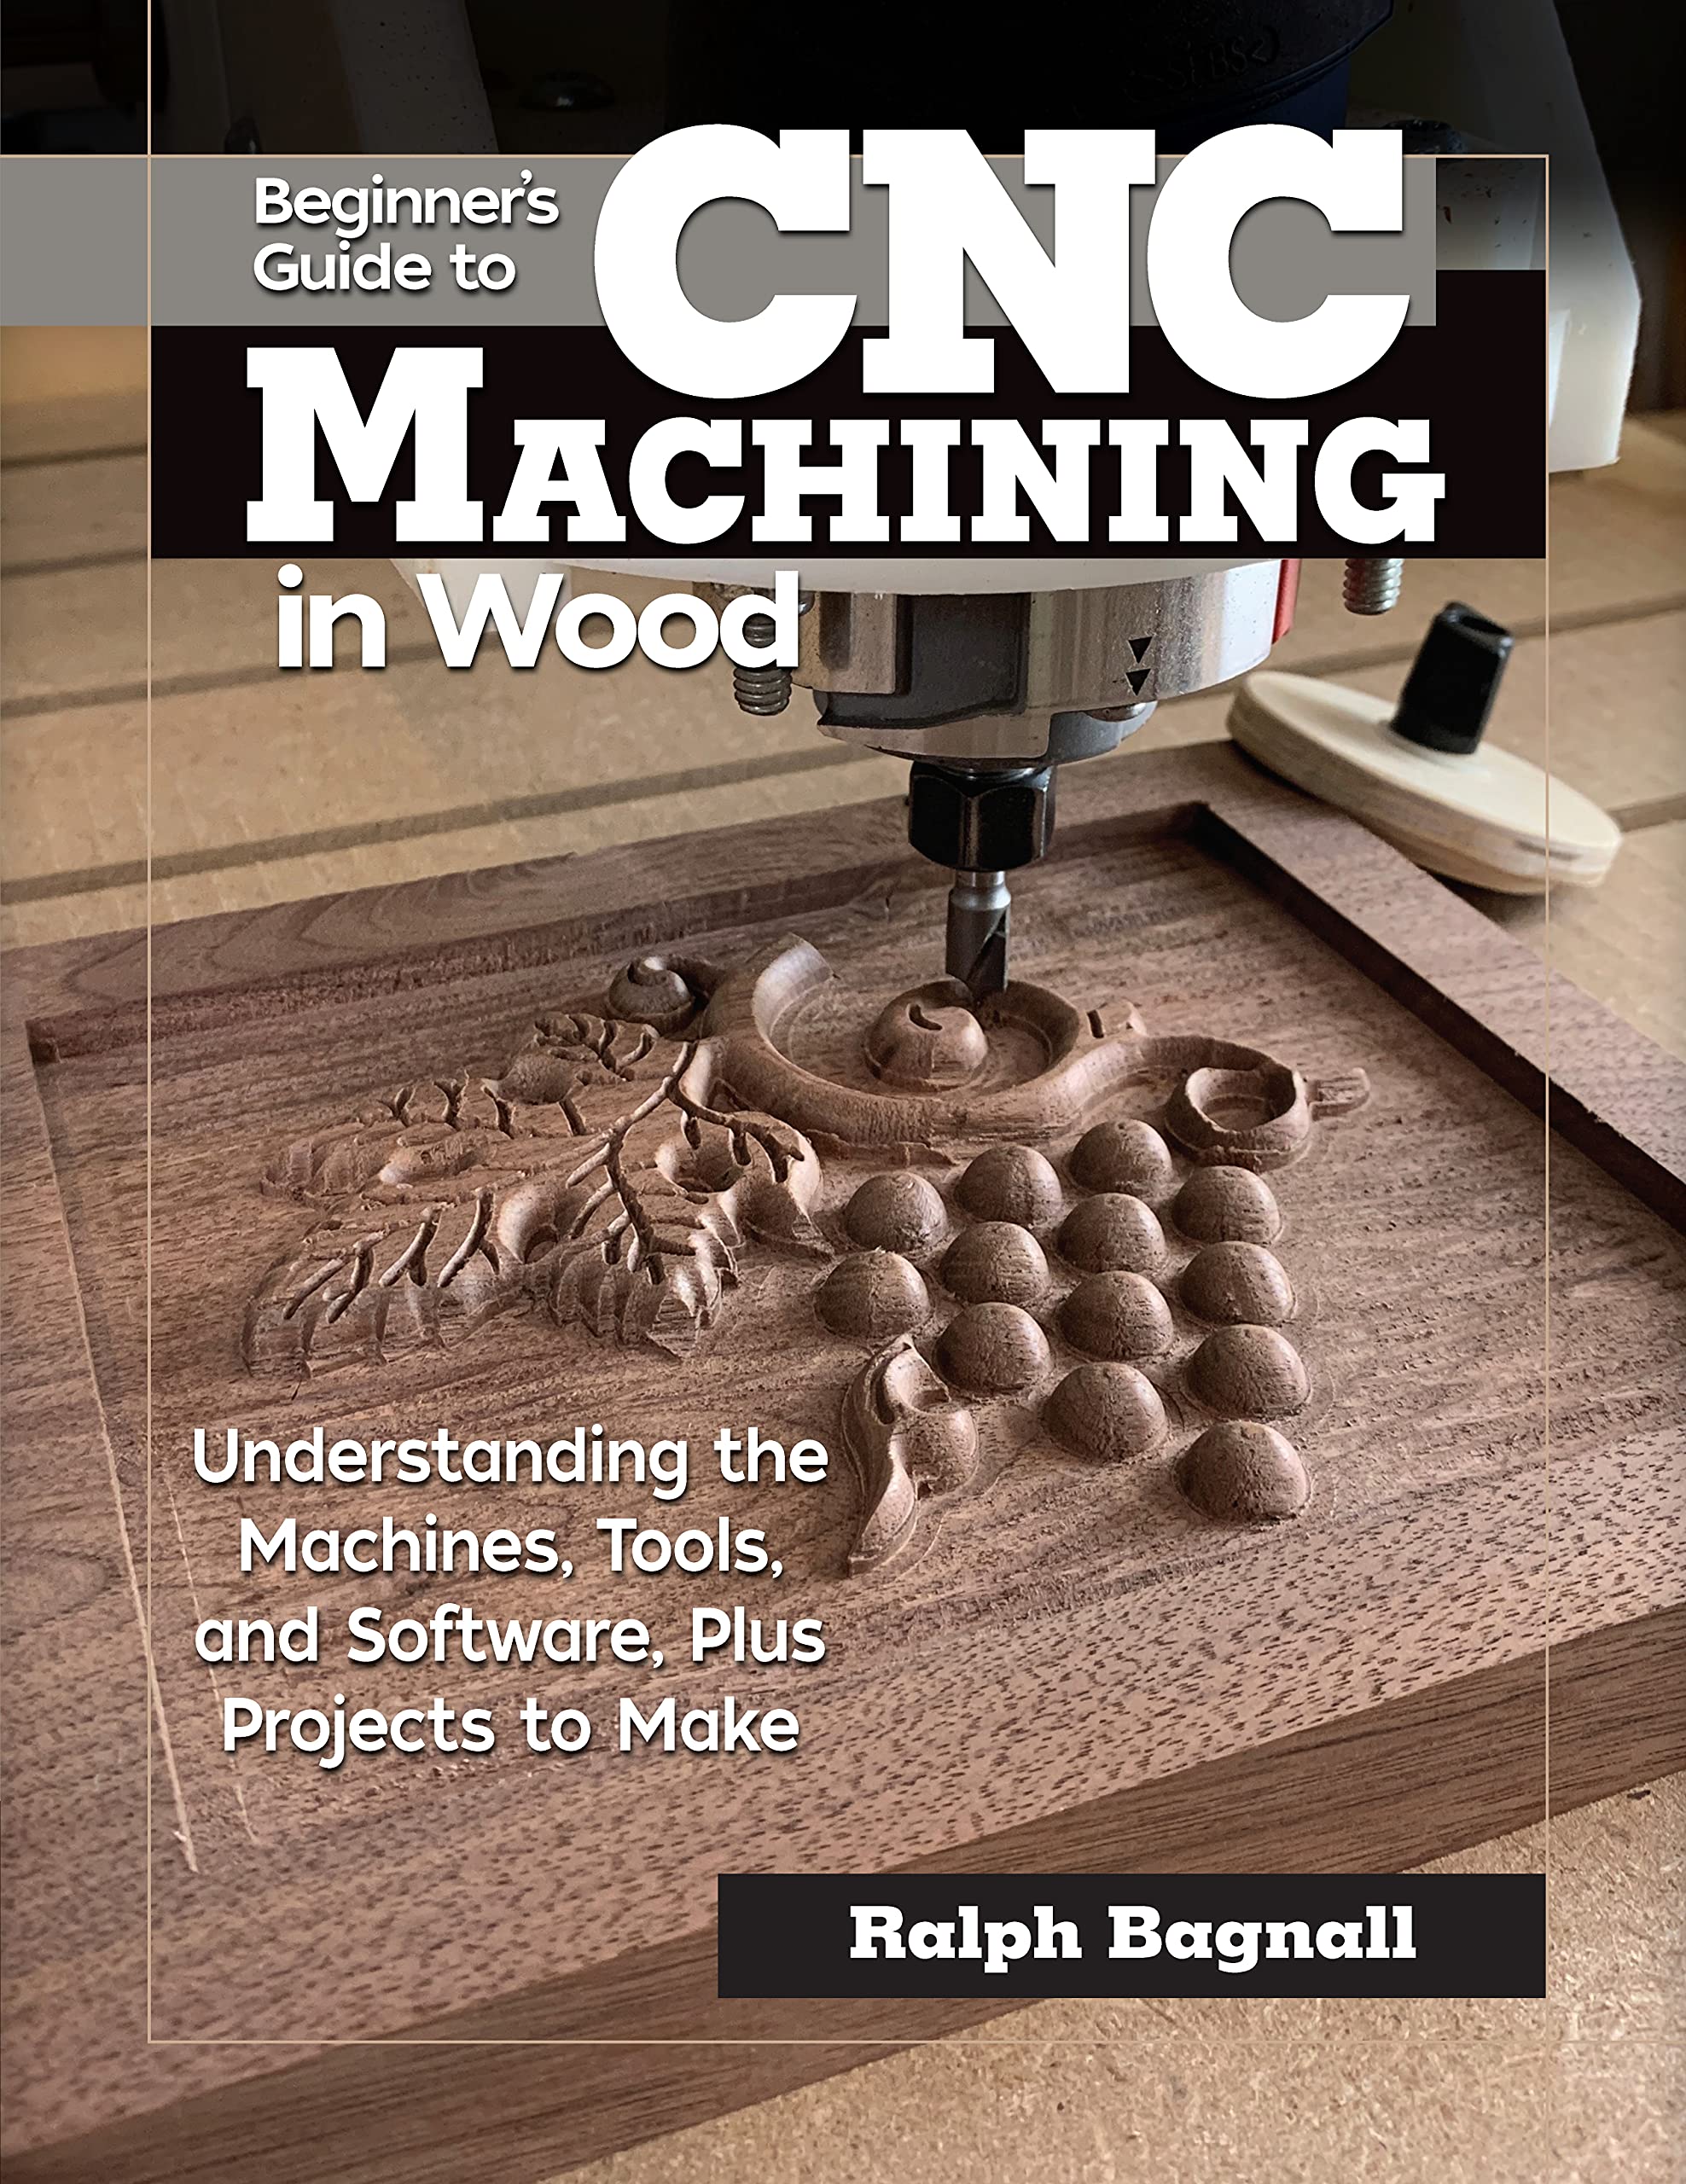 A Beginner's Guide to Building a Simple CNC Machine